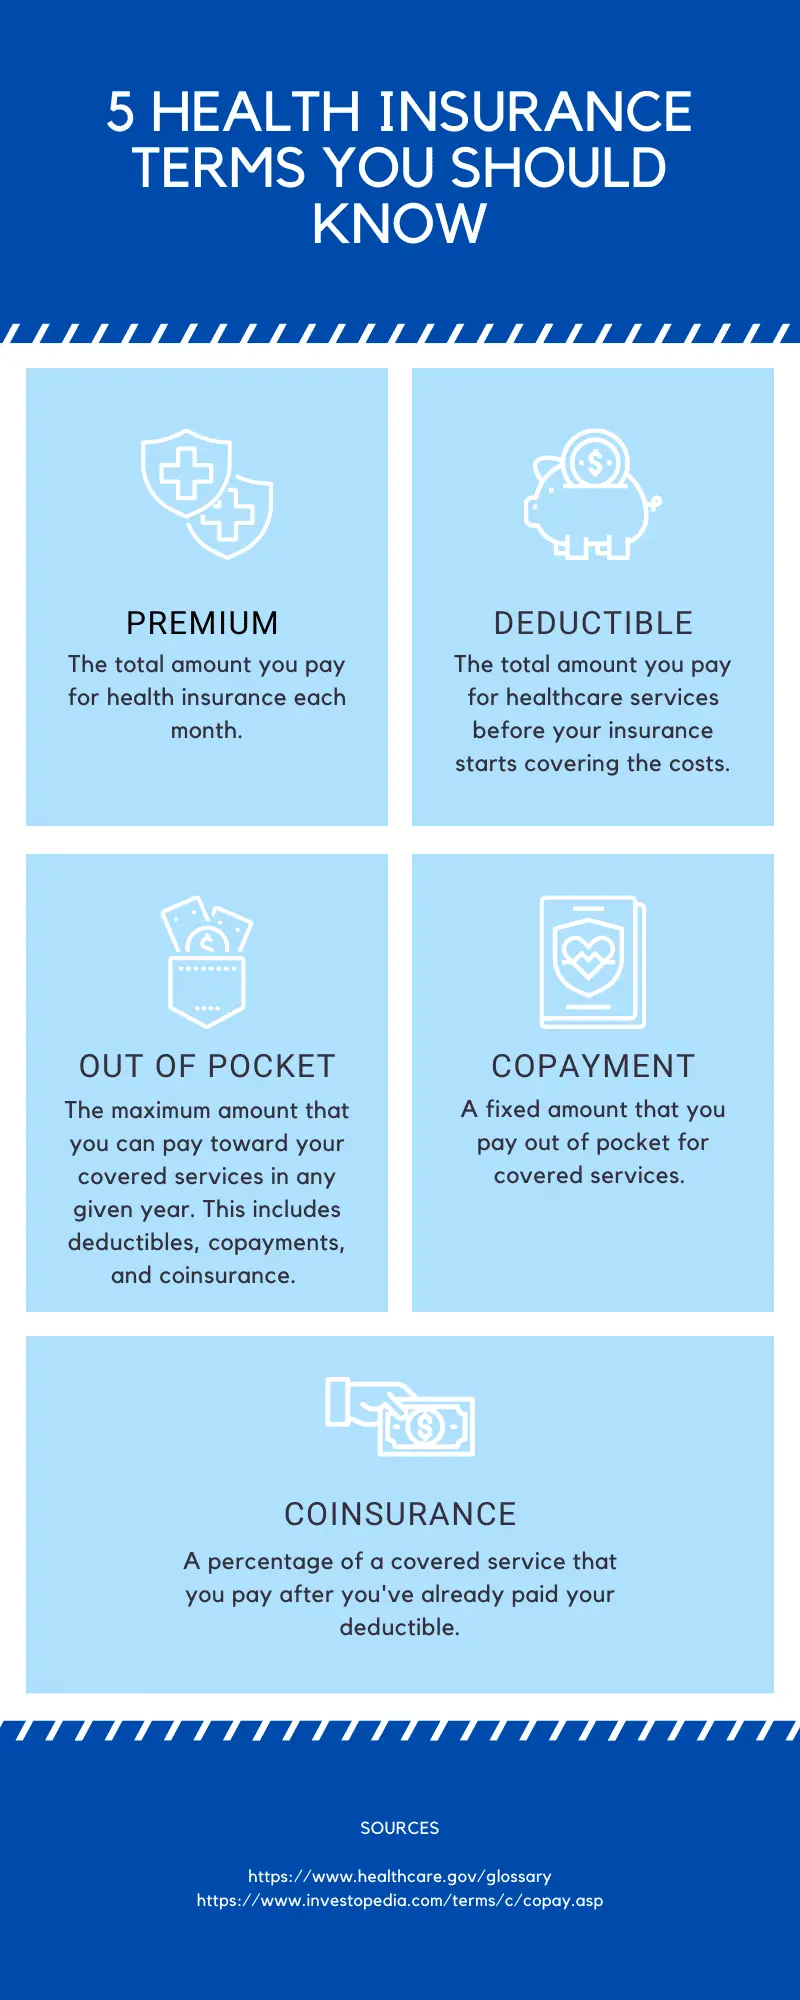 How Does Health Insurance Work? Breaking Down The Basics [Infographic